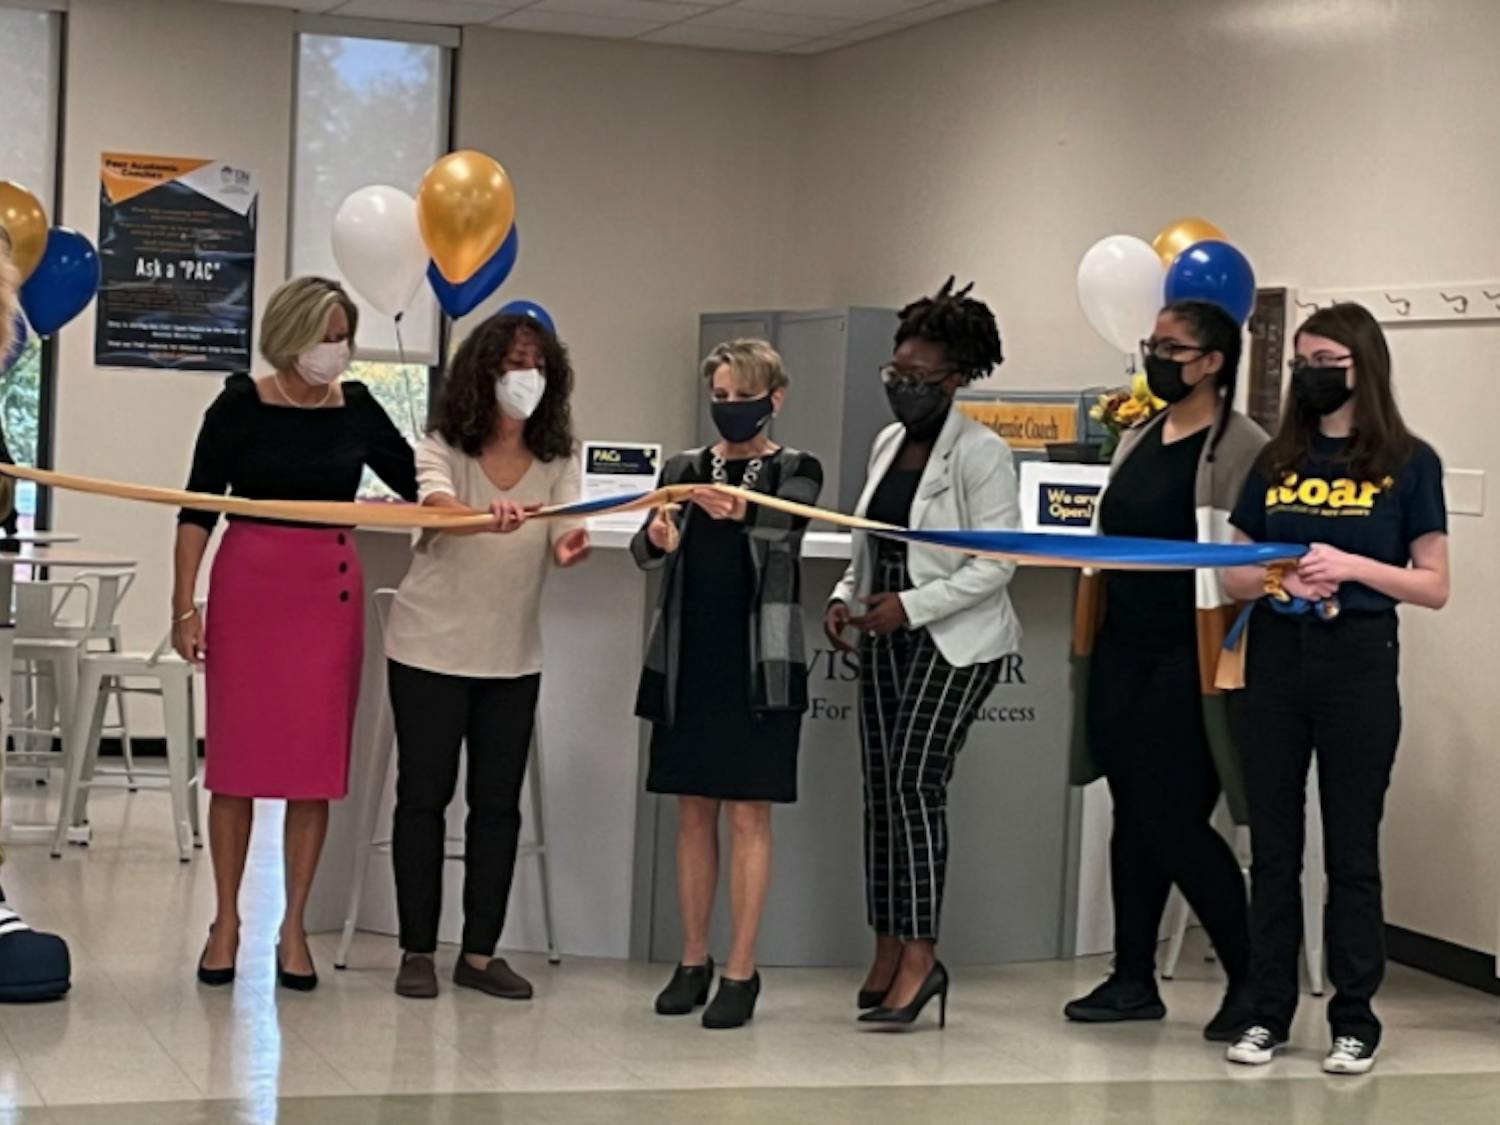 President Foster cuts the ribbon for the Center for Student Success’s new Advising Bar in Roscoe West Hall on Oct. 27 (Emma Ferschweiler / Staff Writer).